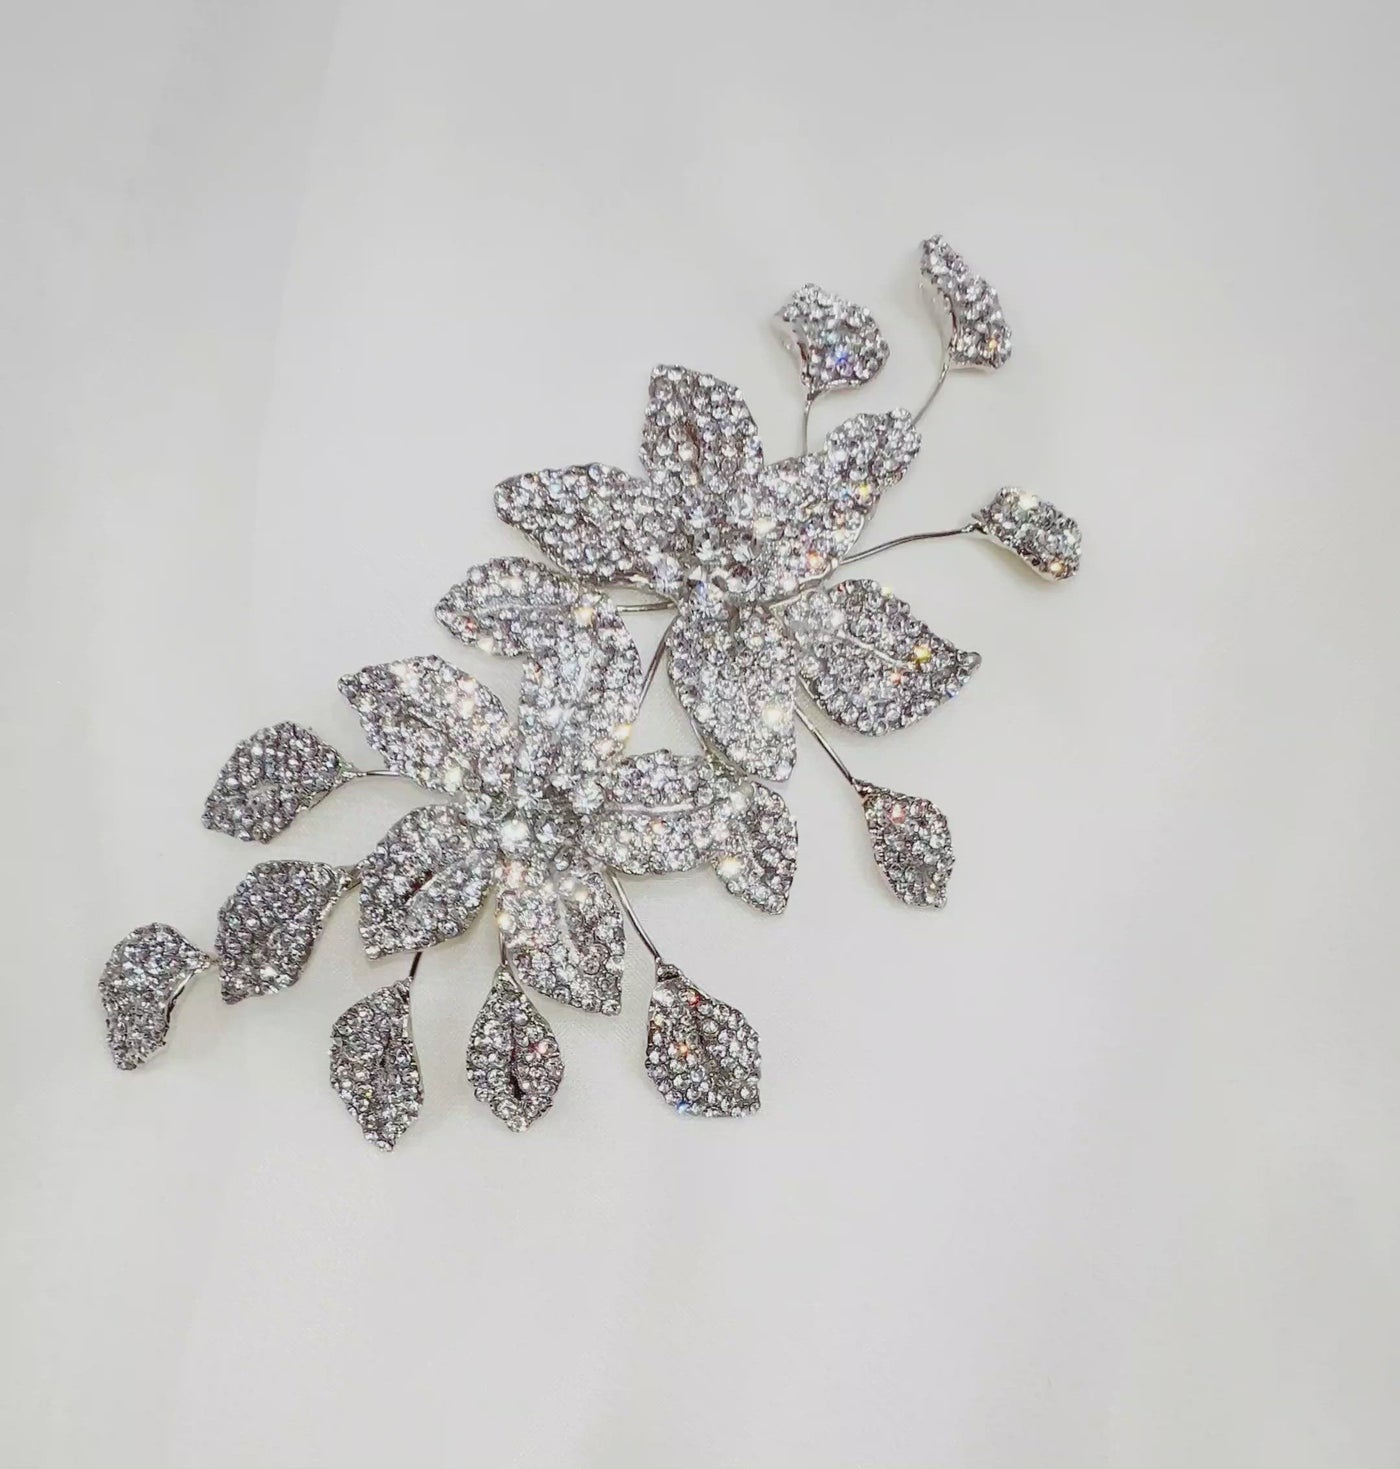 bridal hair comb with crystalized flowers and silver sprigs of leaves